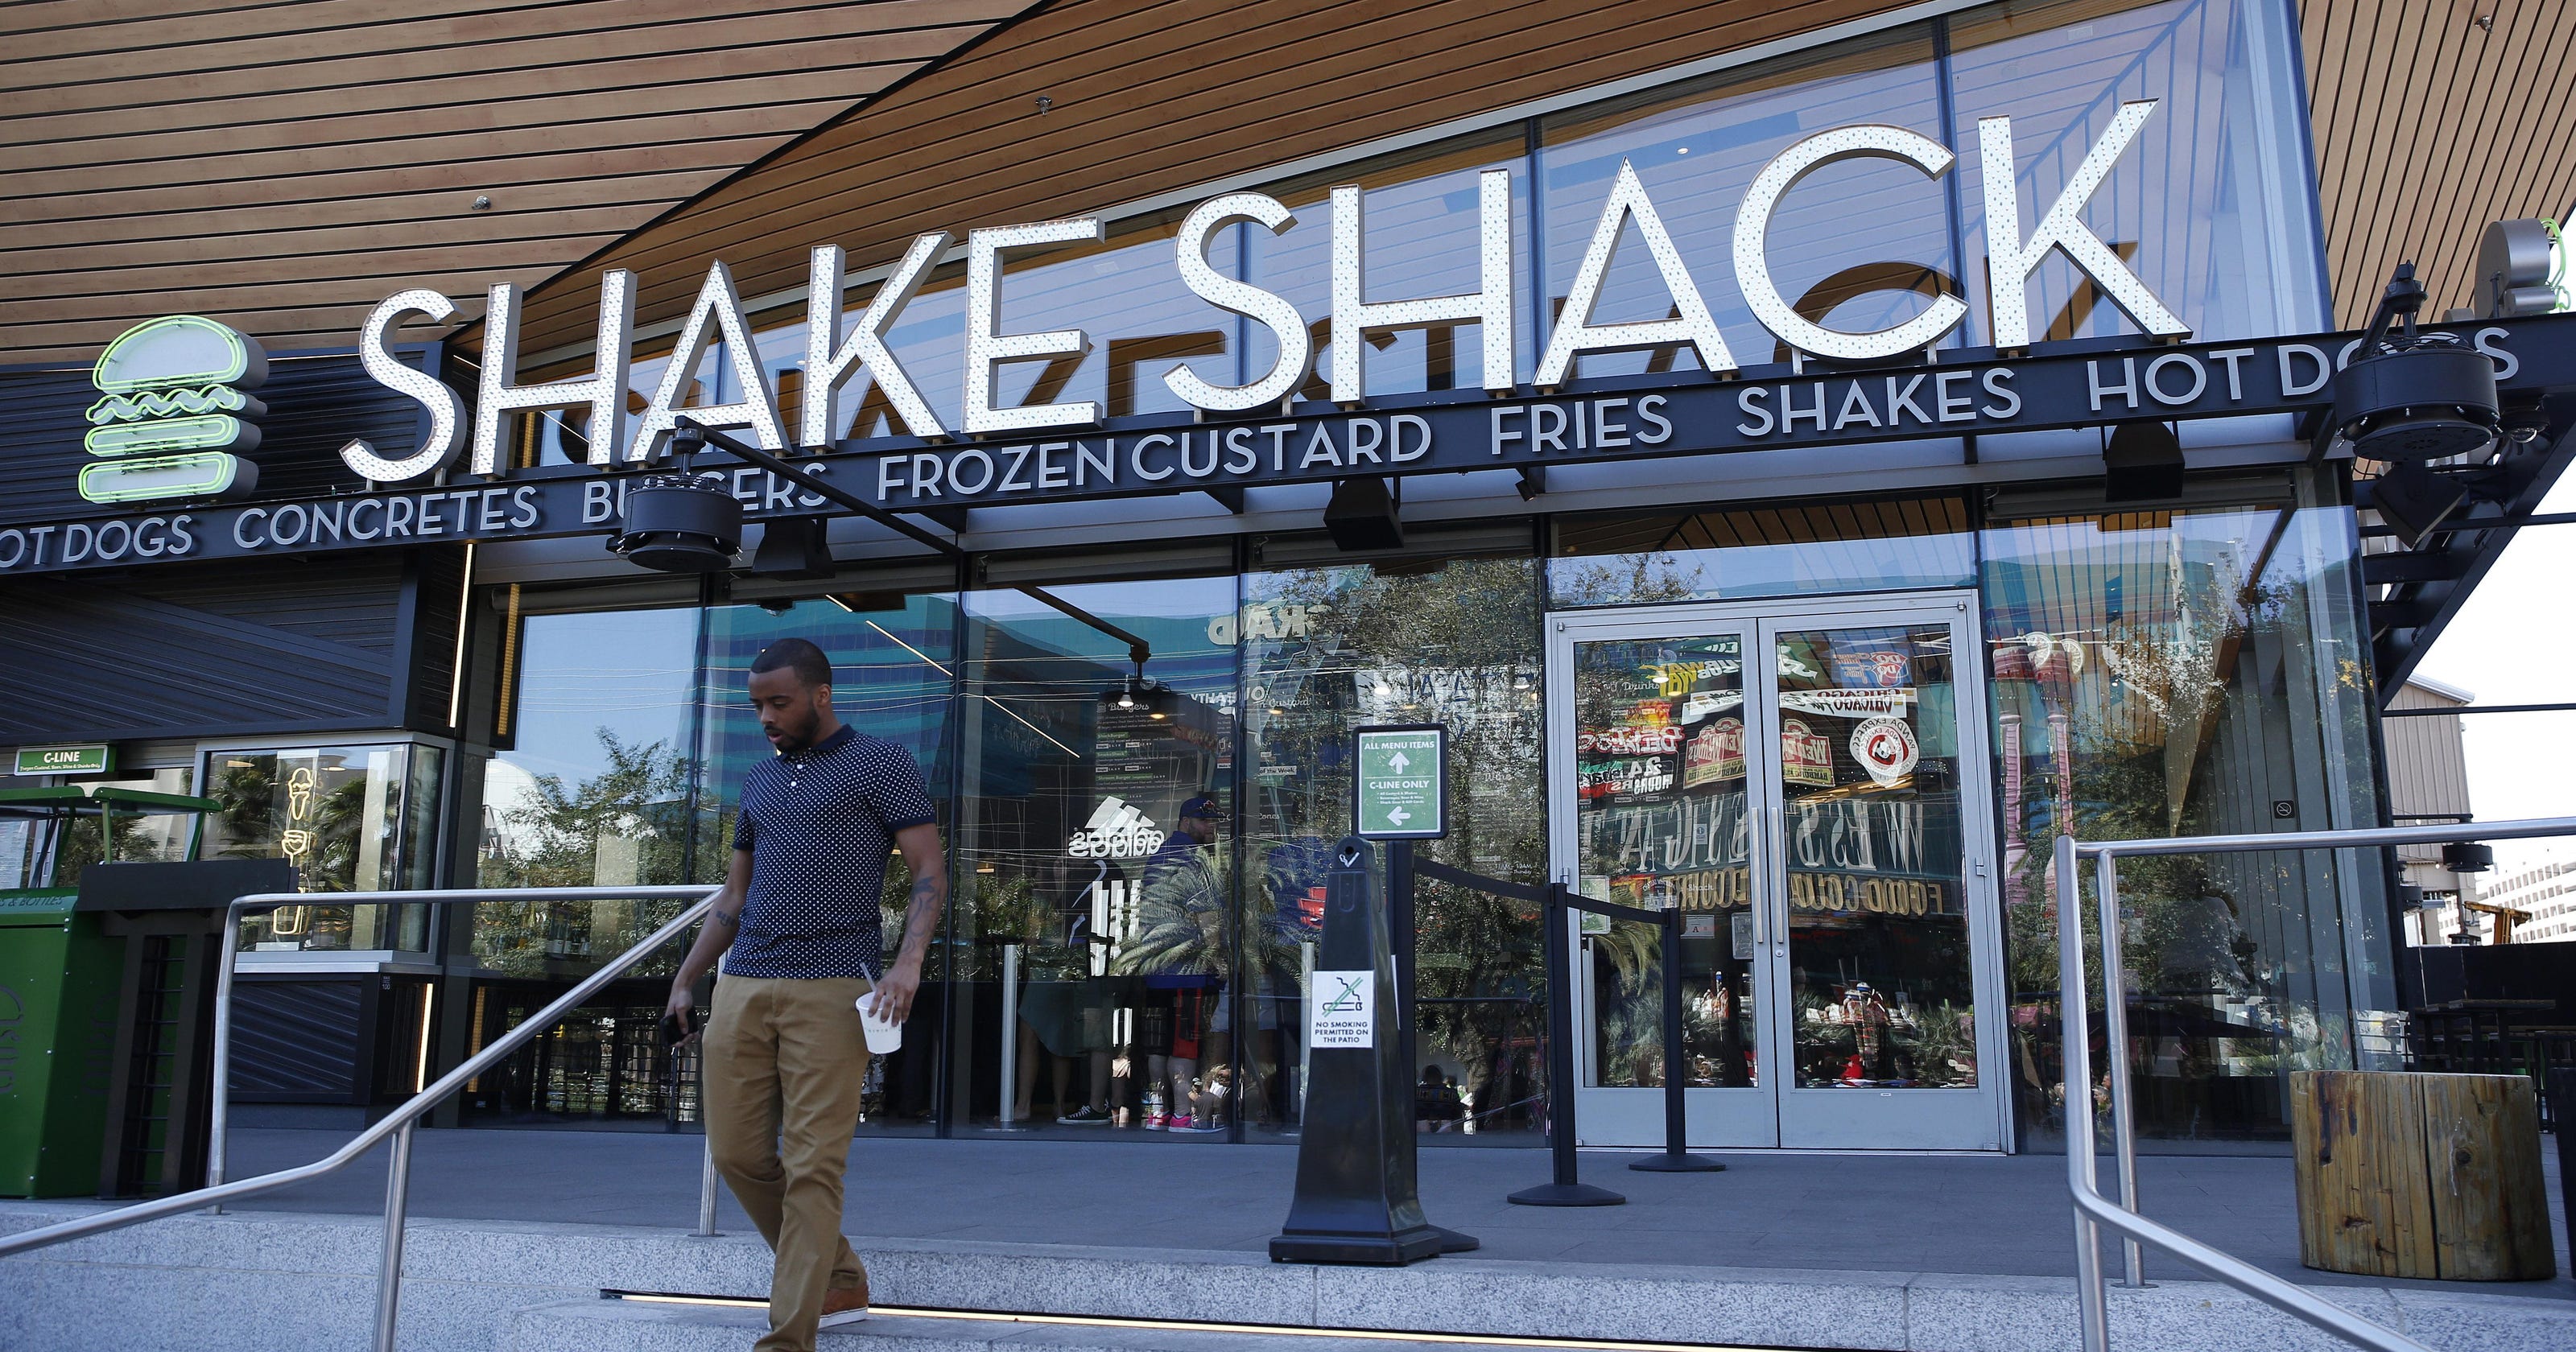 Shake Shack appears to resume plans for Fishers restaurant after delay